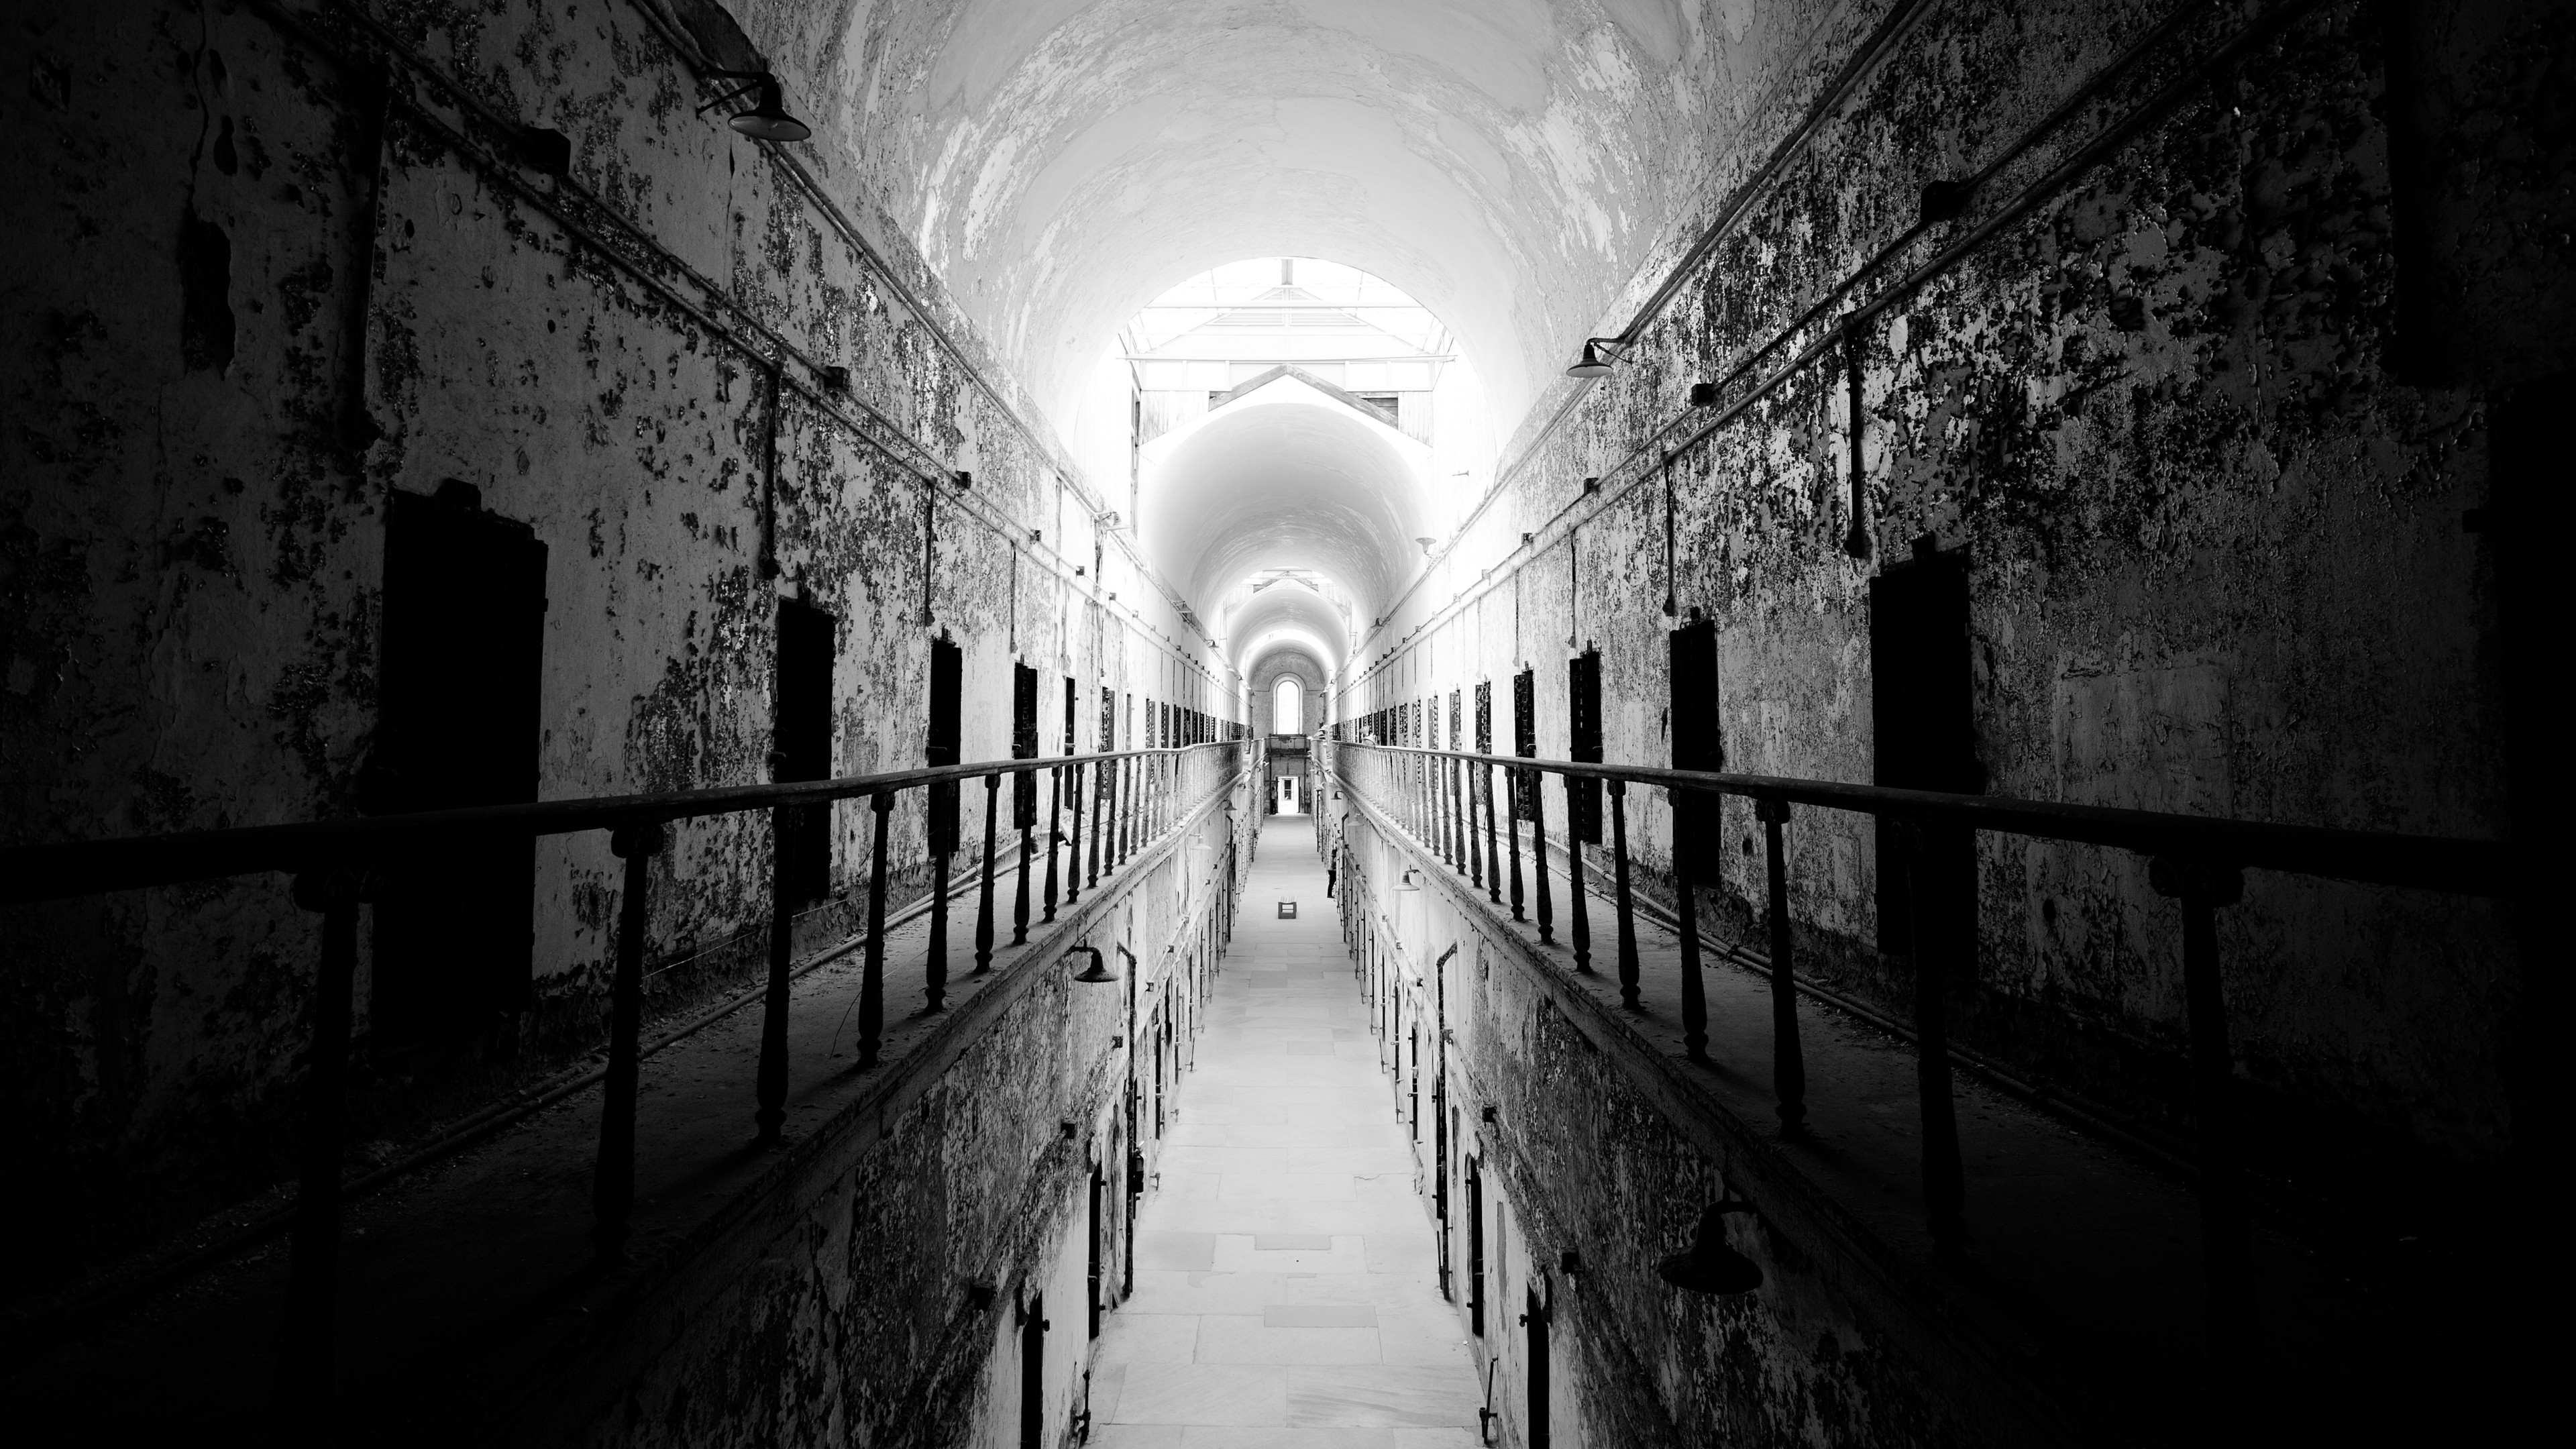 General 3840x2160 building prison monochrome abandoned ruins indoors